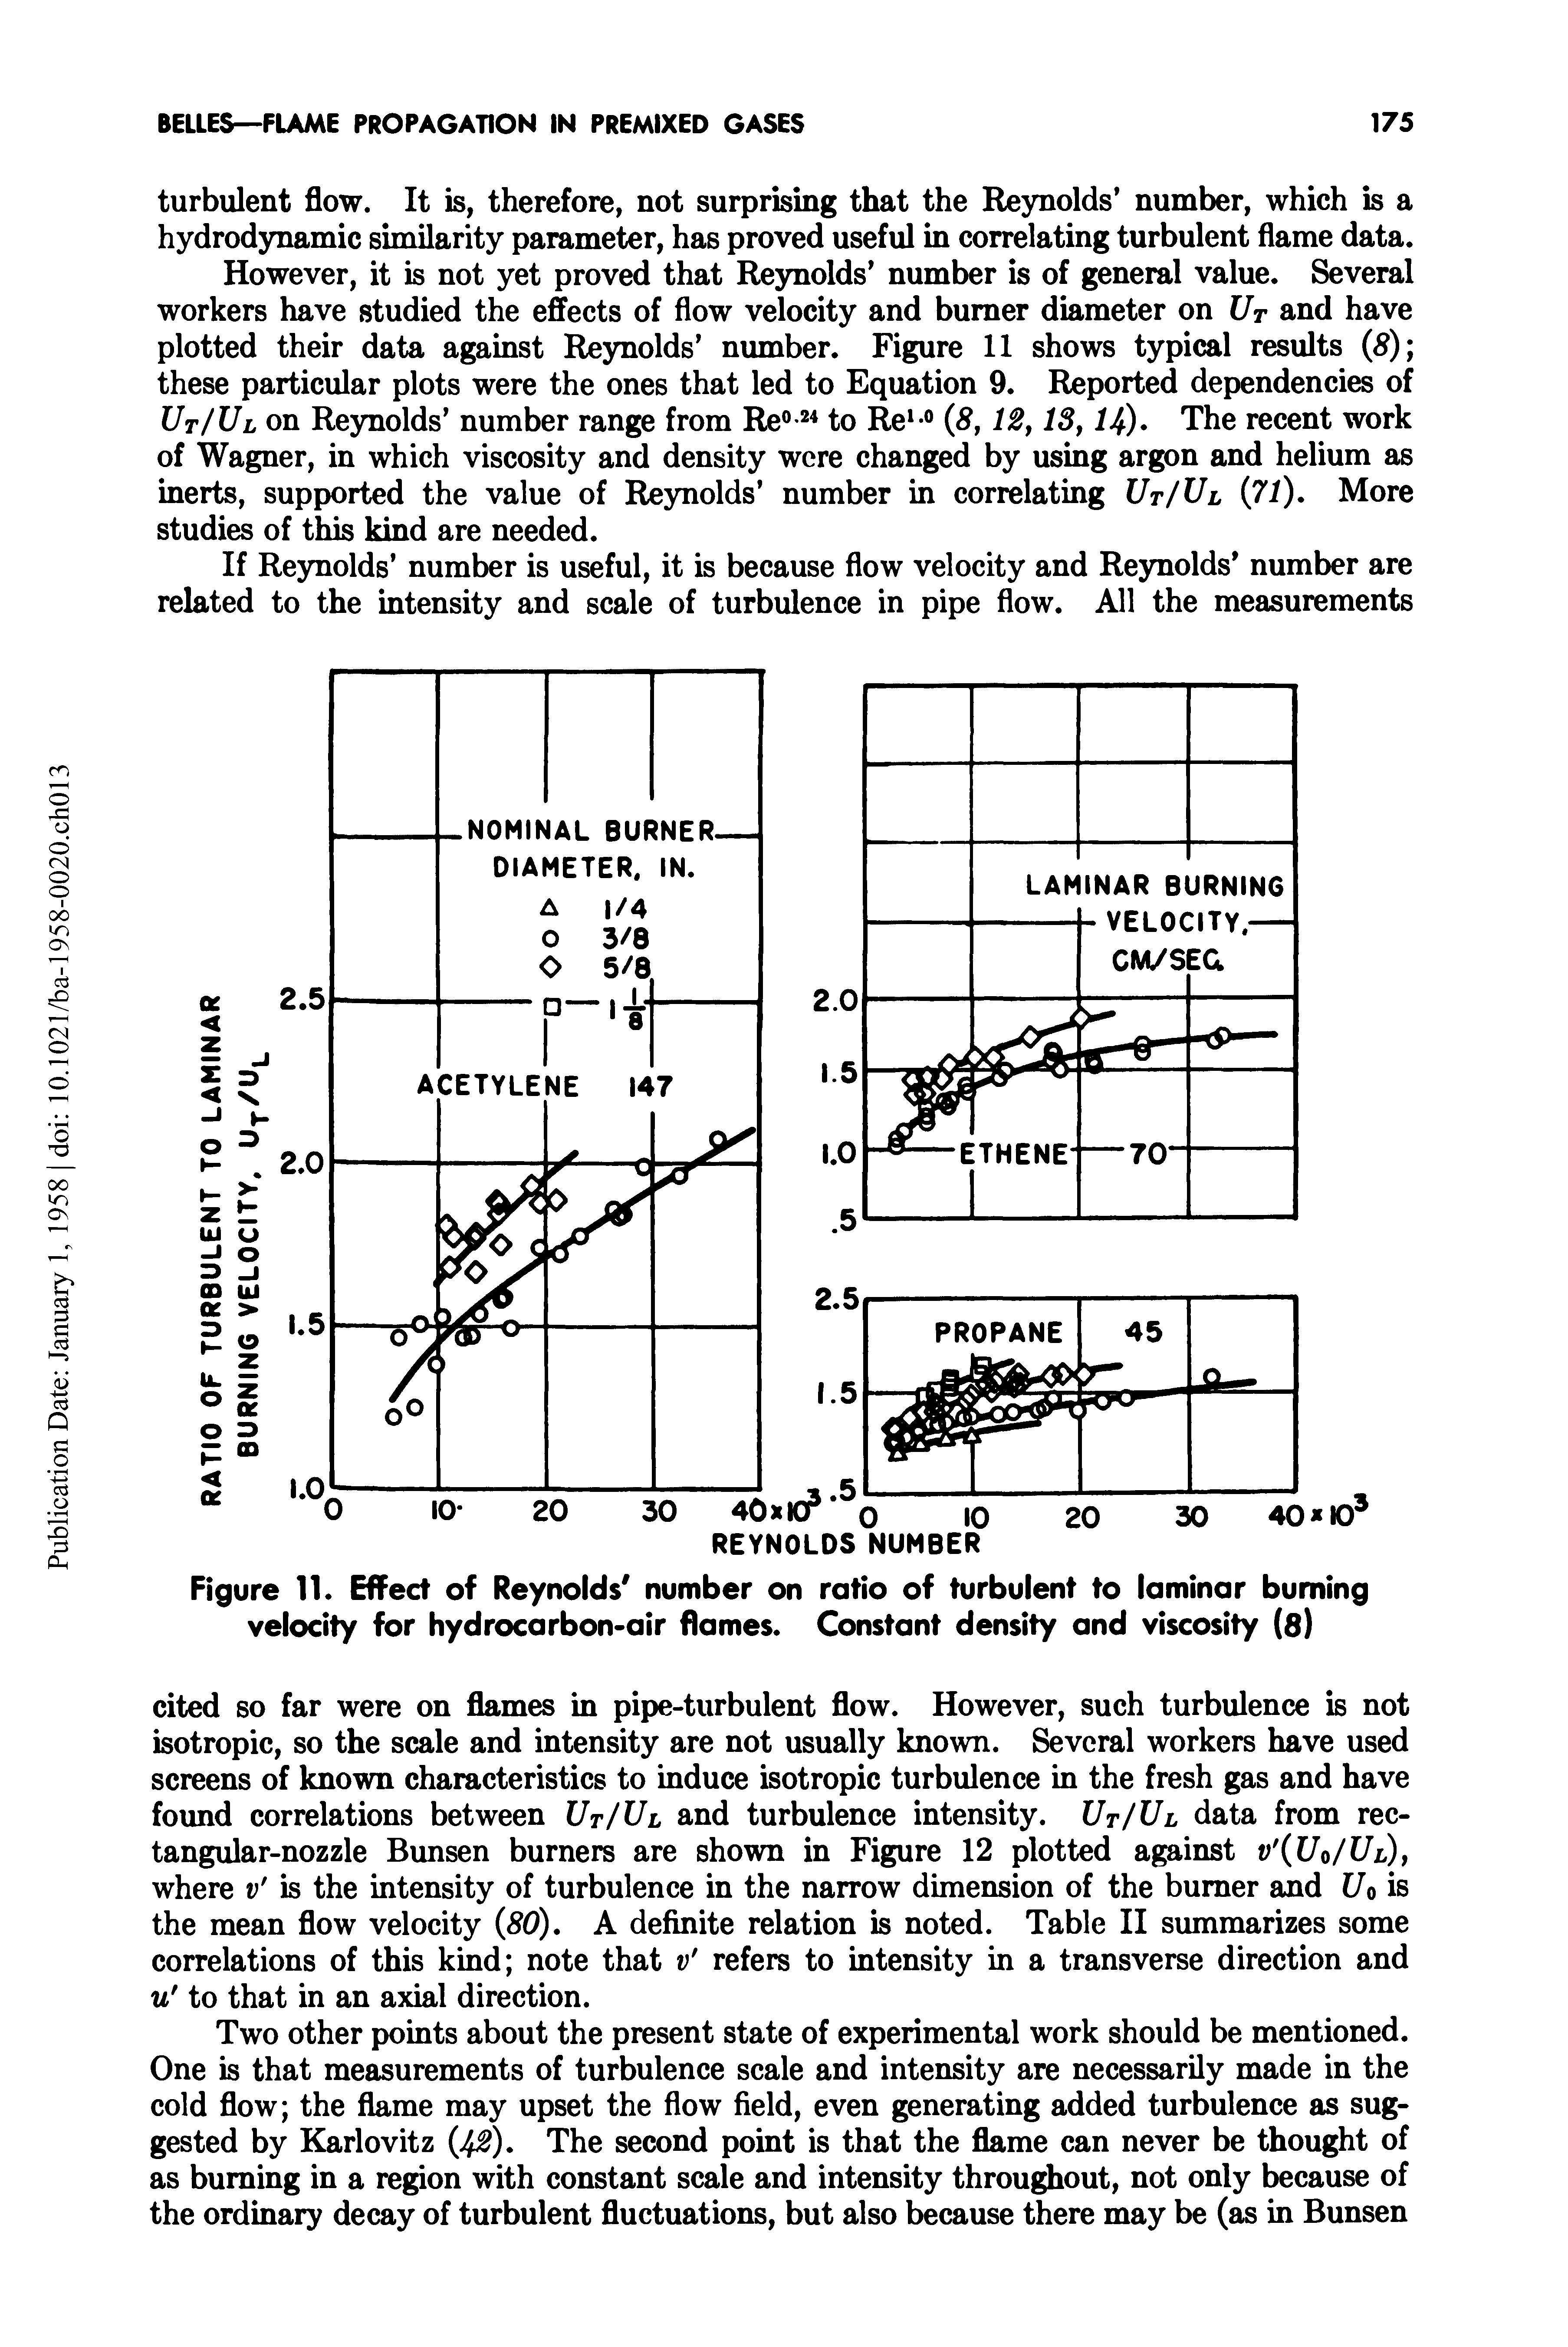 Figure 11. Effect of Reynolds number on ratio of turbulent to laminar burning velocity for hydrocarbon-air flames. Constant density and viscosity (8)...